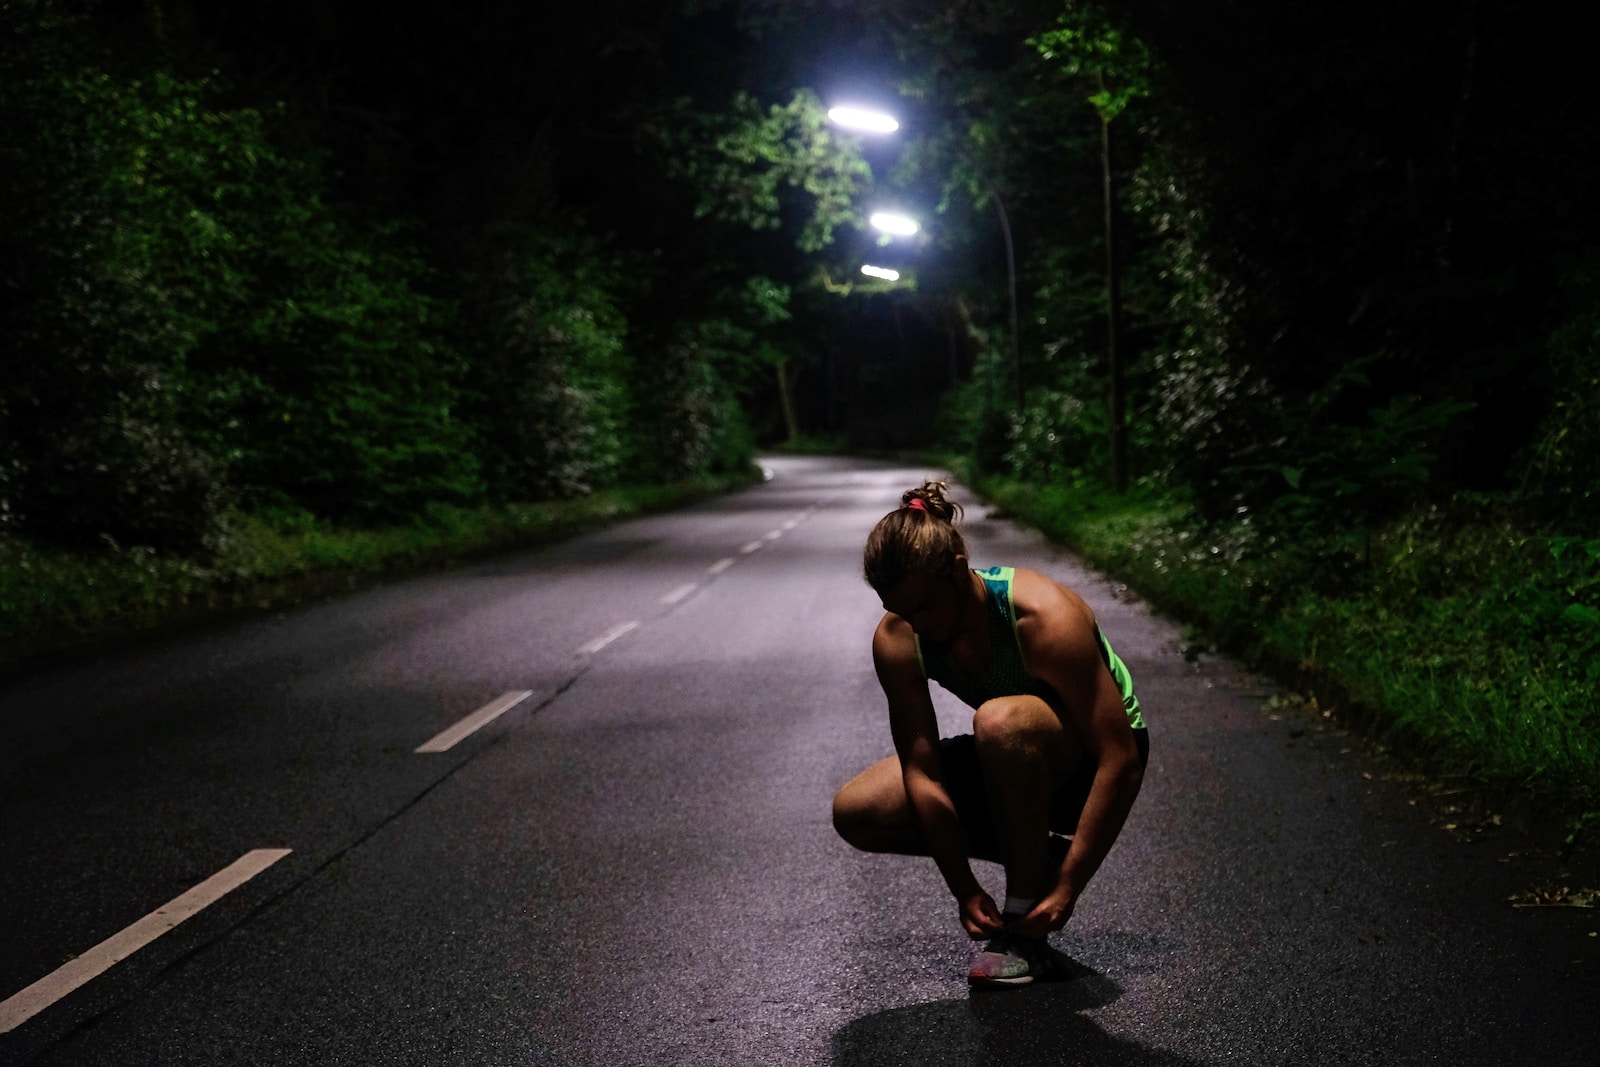 a woman squatting down on a road at night